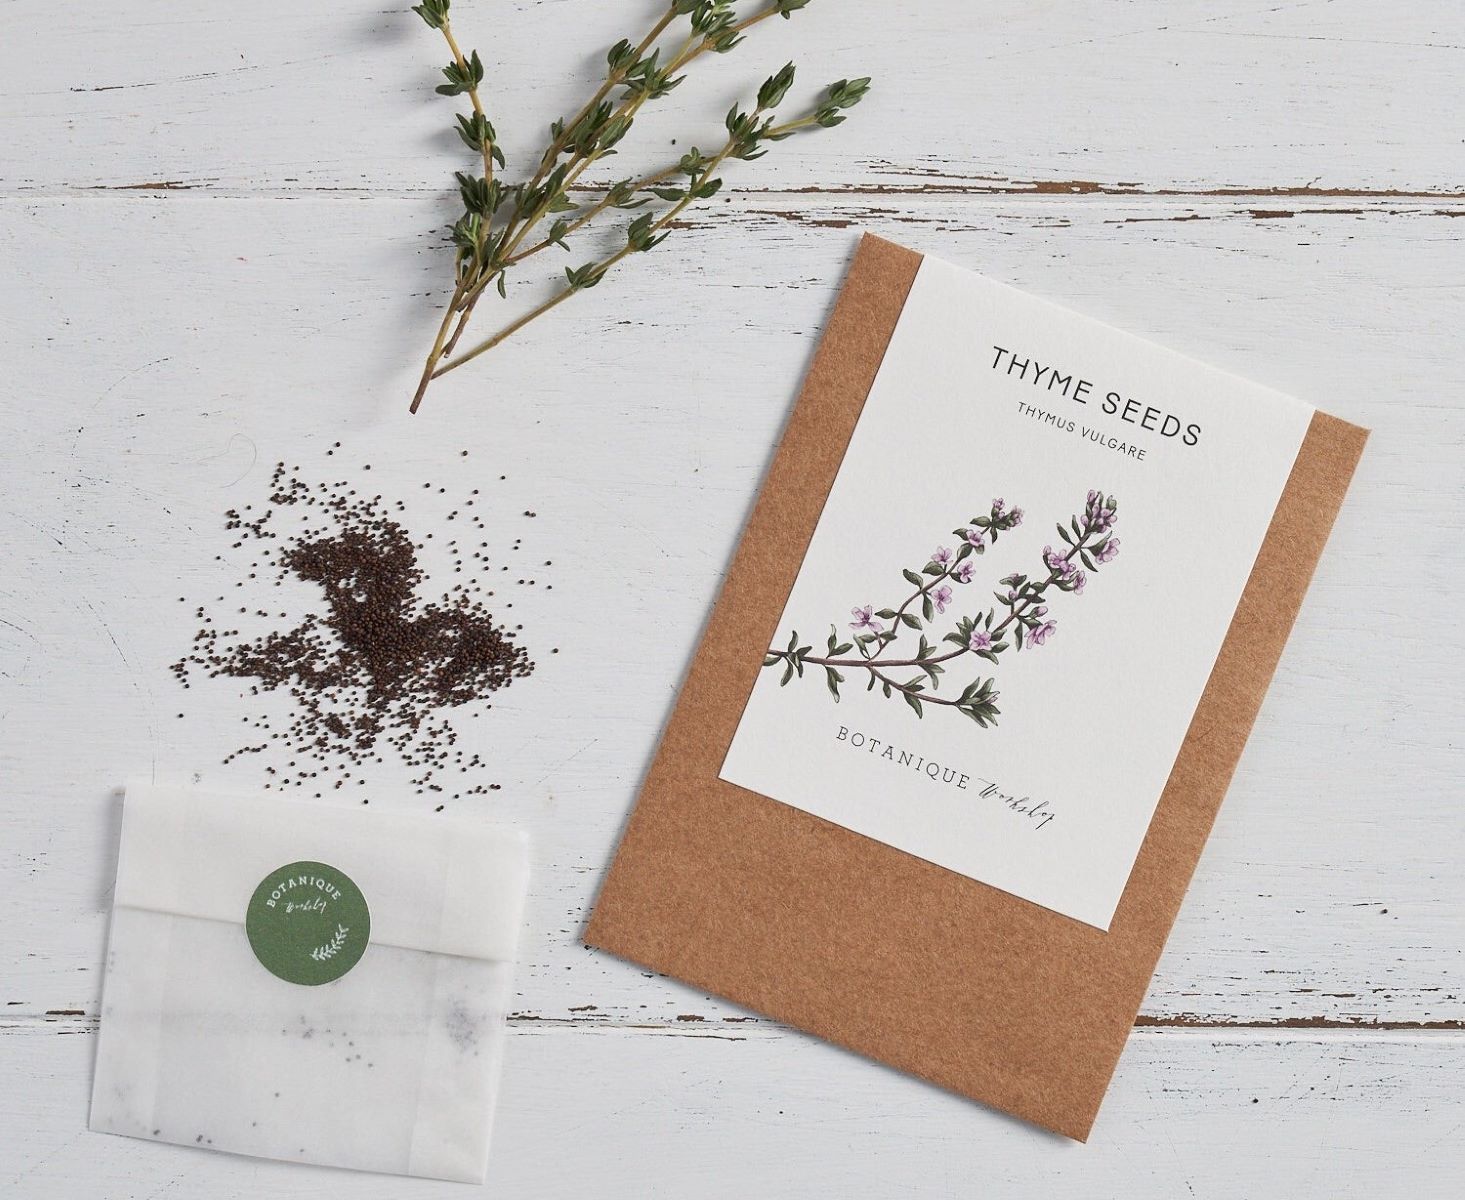 When To Plant Thyme Seeds